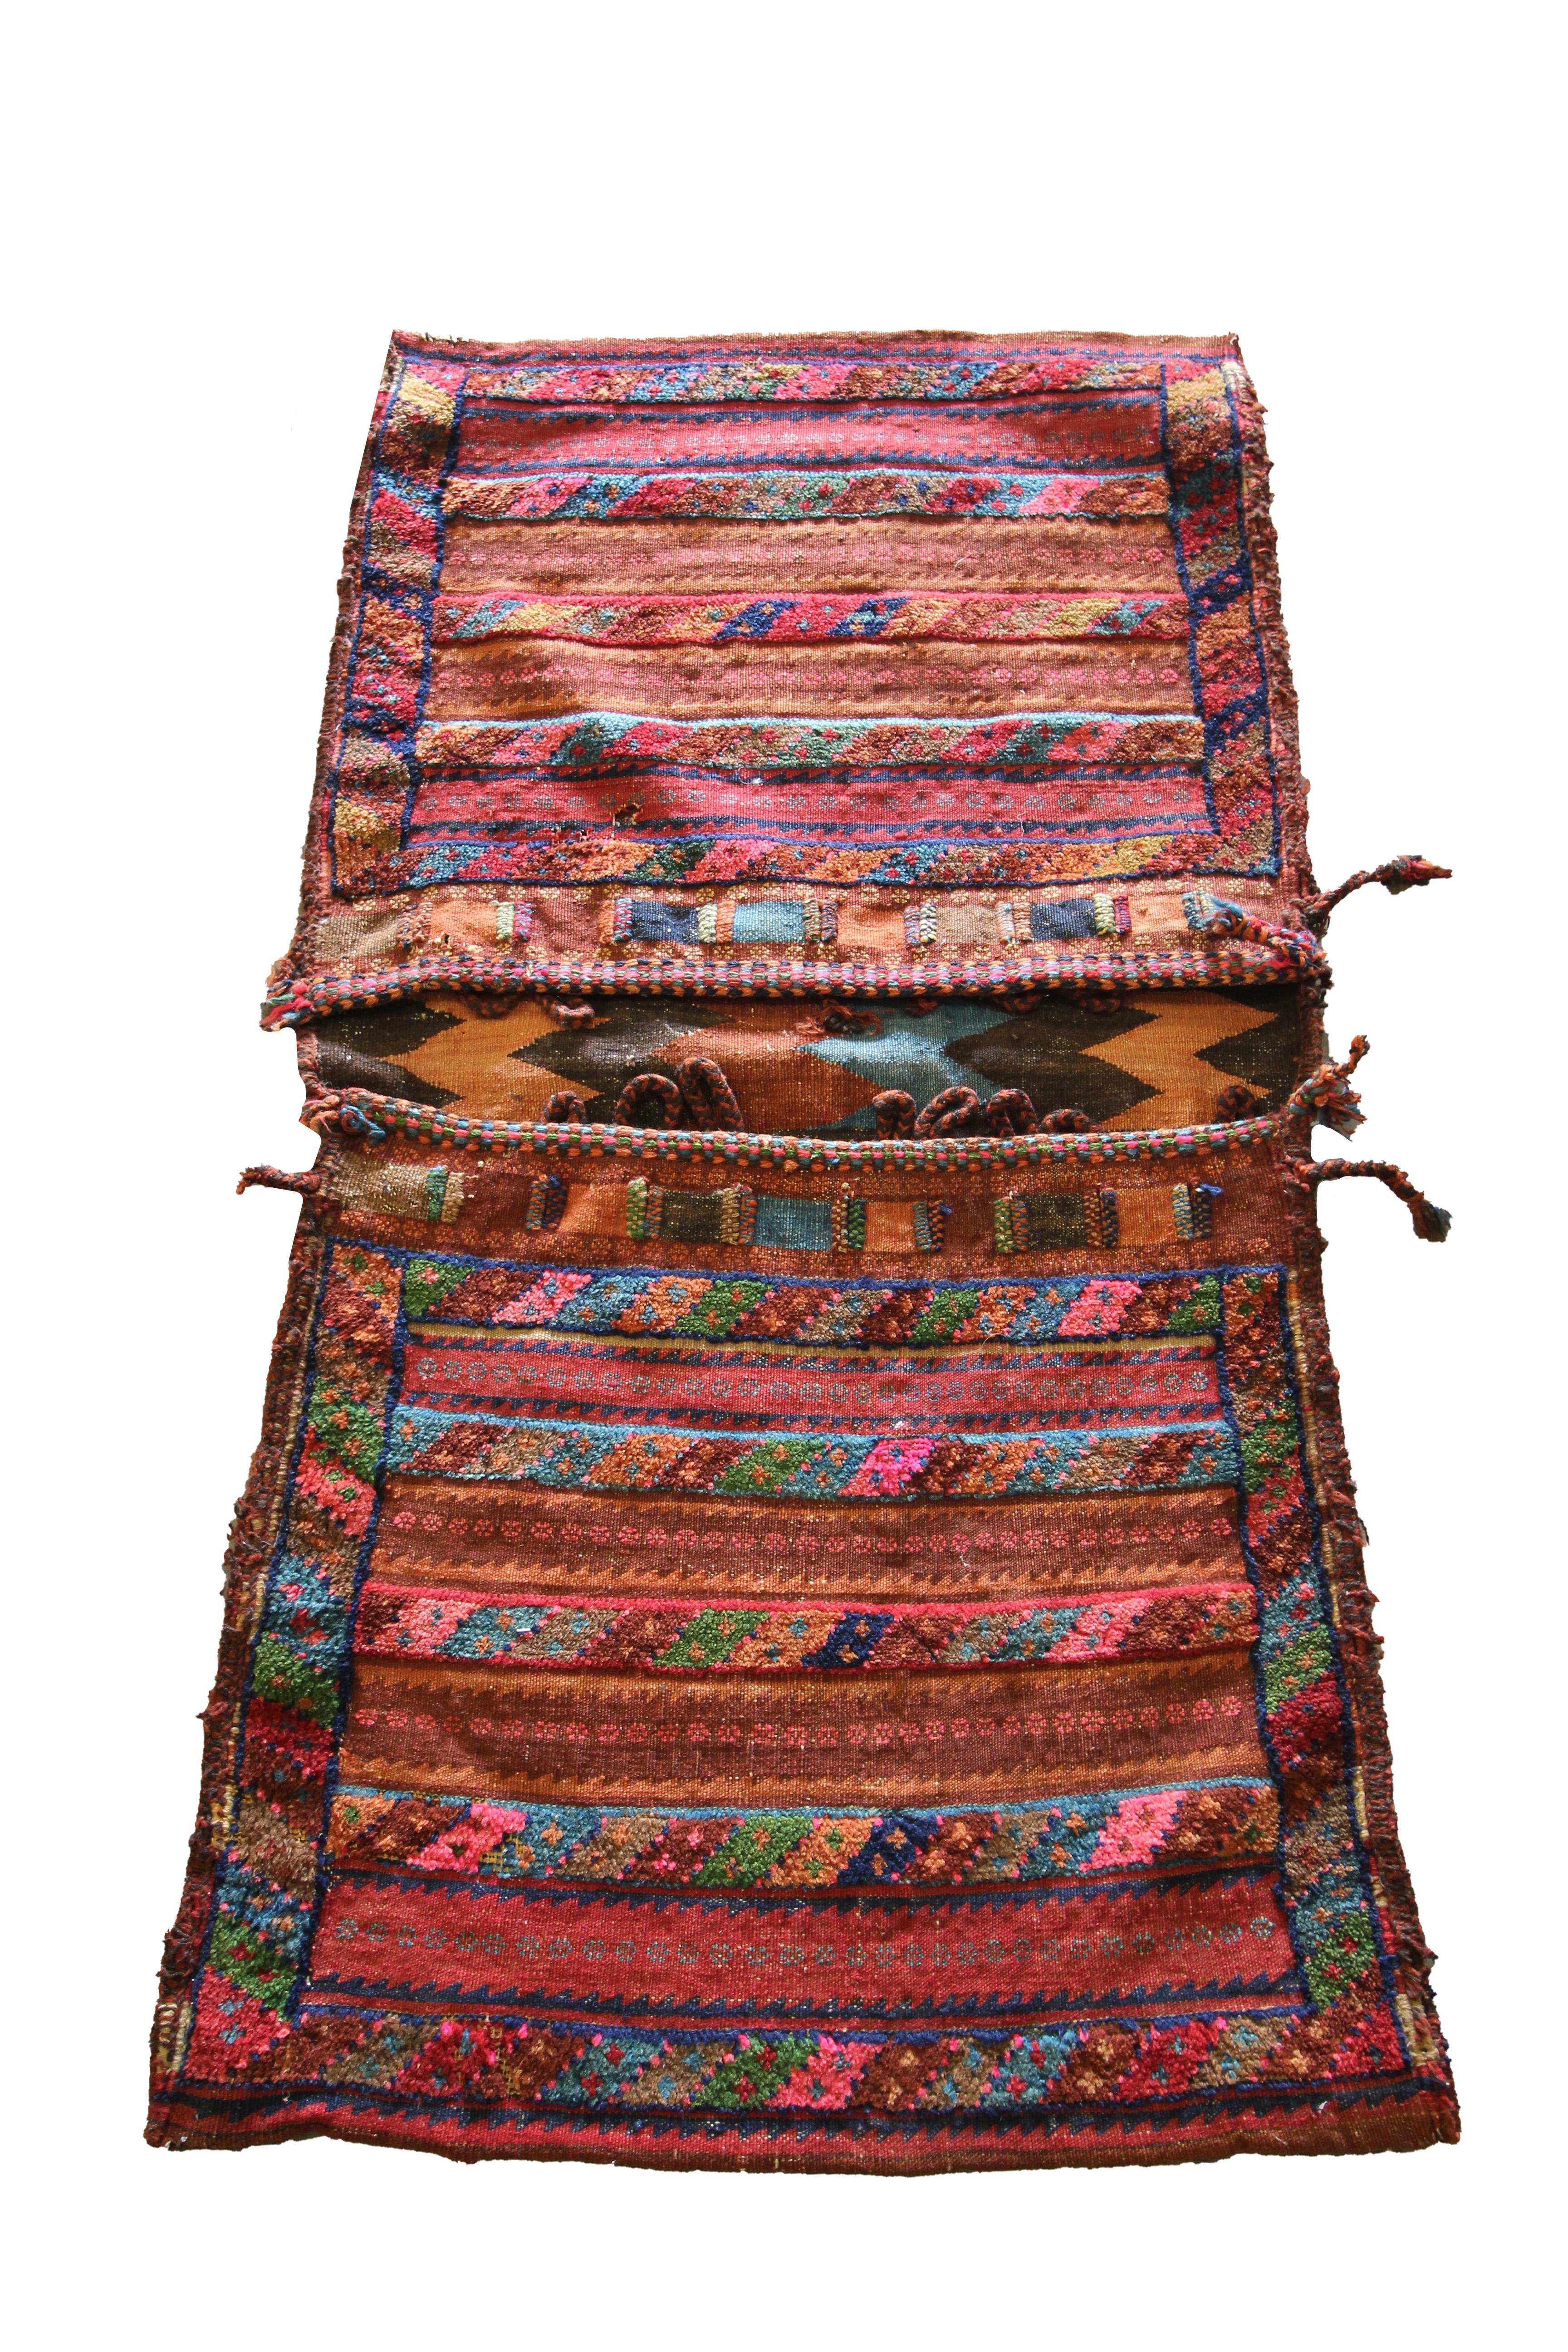 This handwoven textile is an extremely rare Khorjin/ saddle bag woven in the early 20th century. Saddlebags were traditionally used as storage which nomadic travellers used upon horseback. The design features a traditional geometric stripe pattern